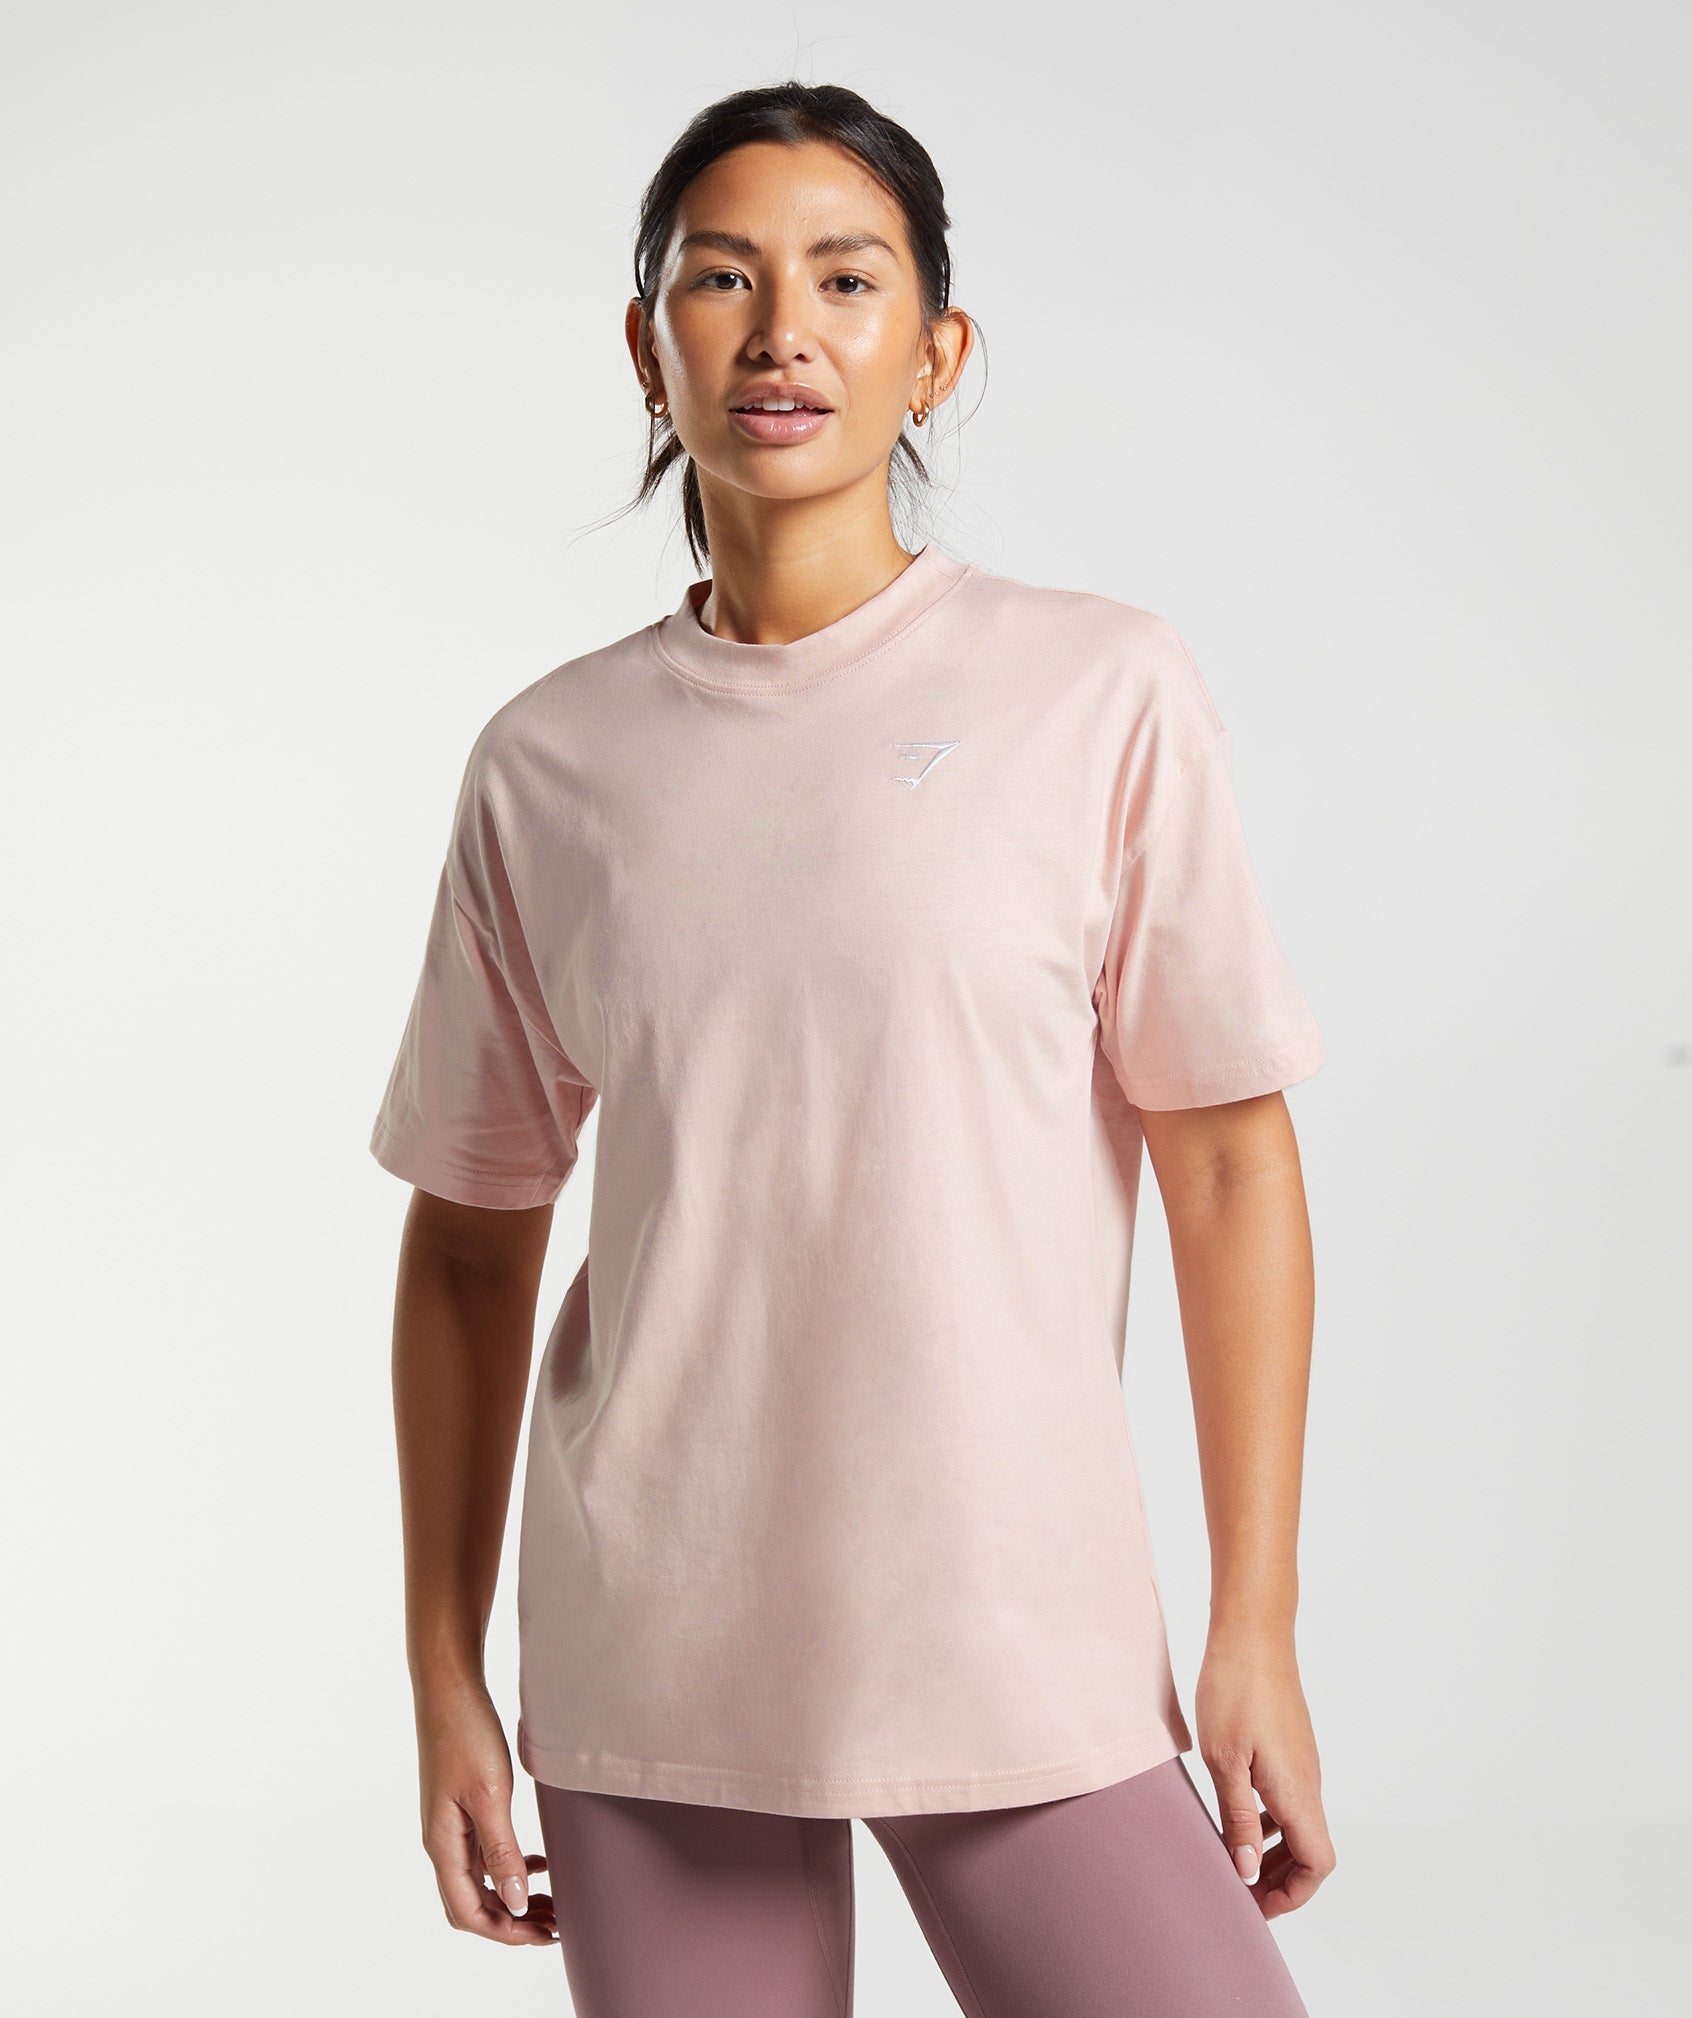 Training Oversized T-Shirt in Misty Pink - view 1